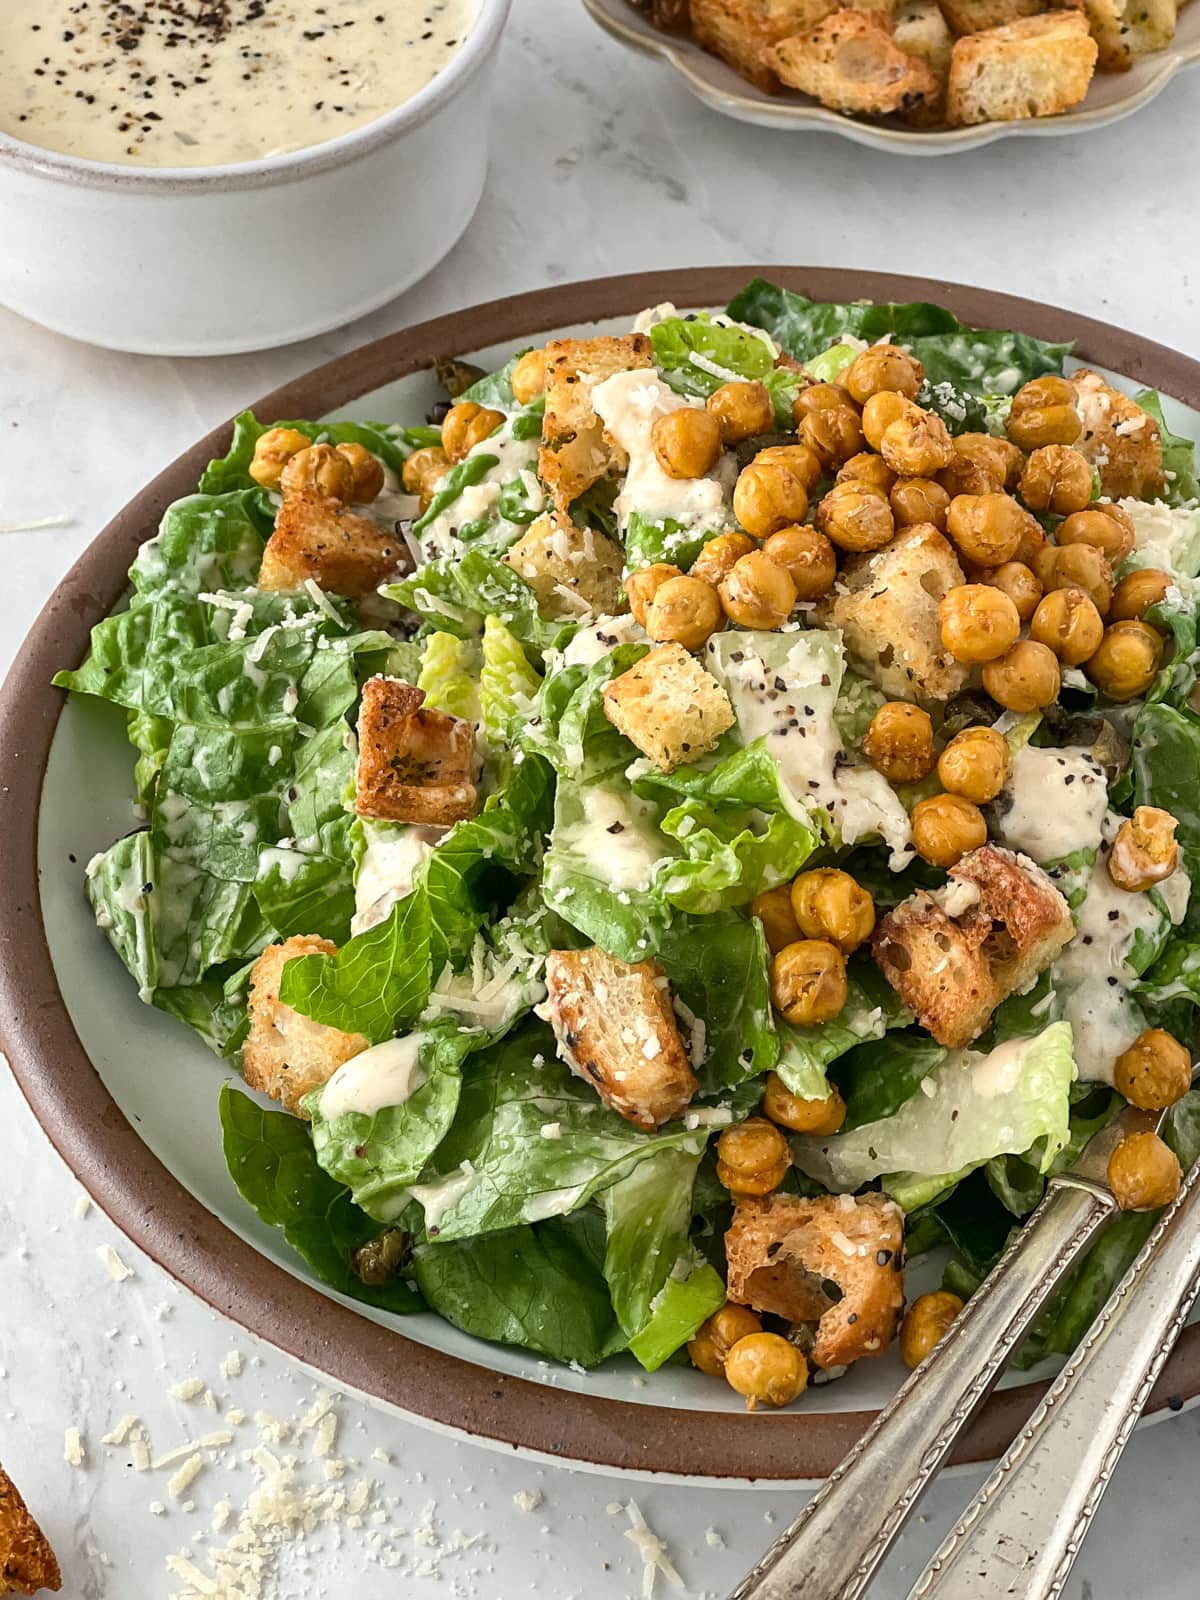 Plateful of non dairy caesar salad topped with croutons and crispy chickpeas.